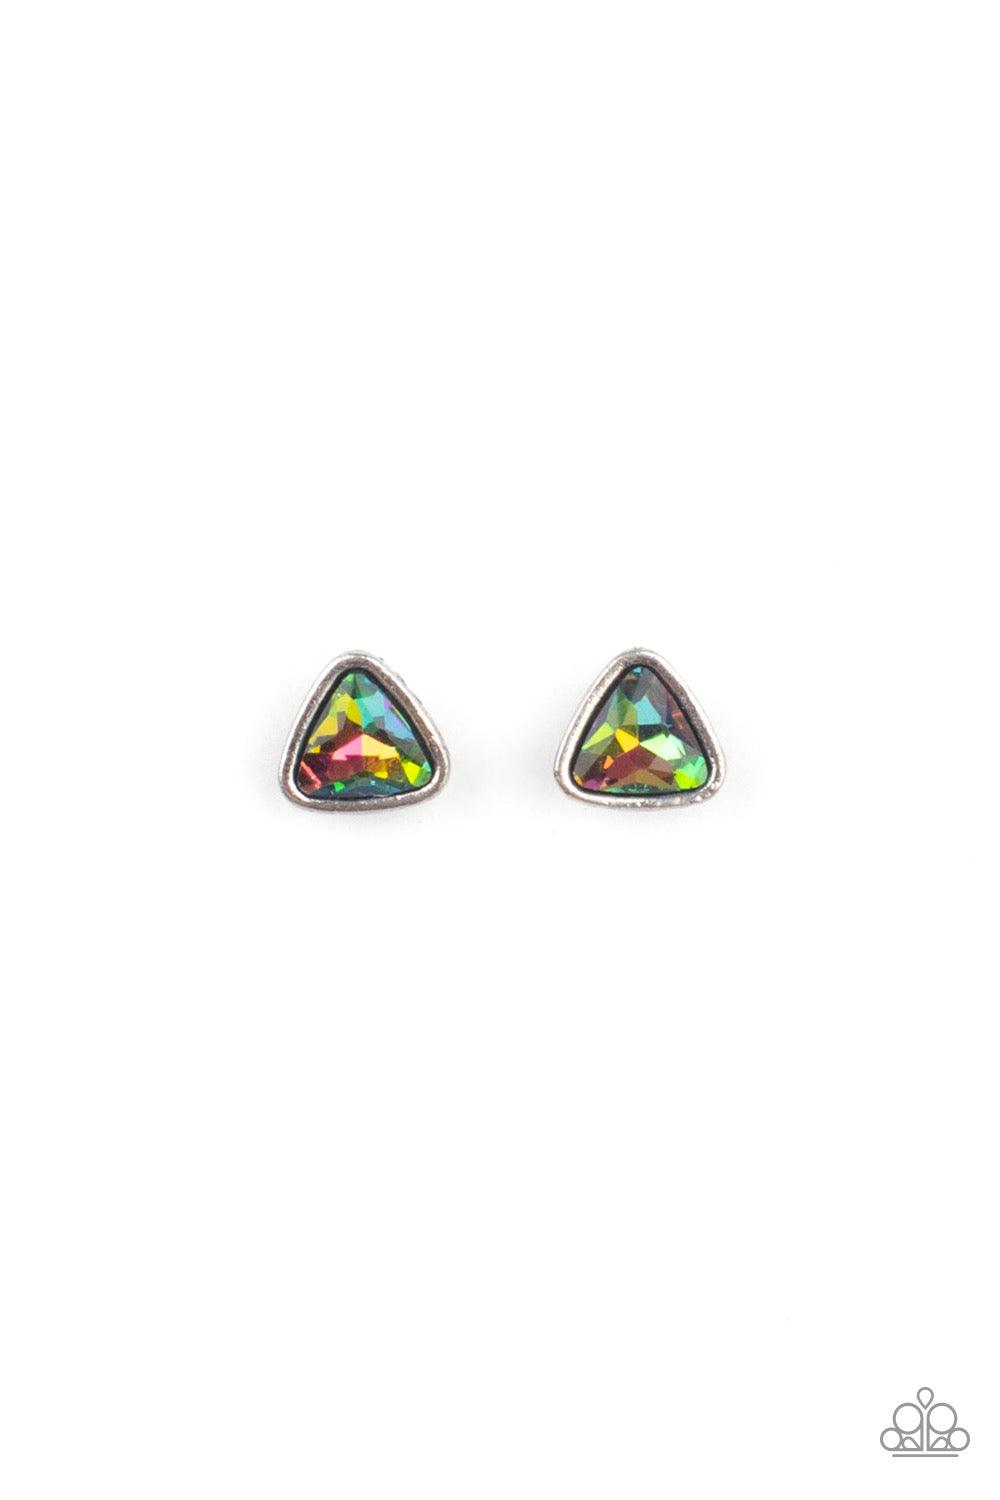 Paparazzi Accessories Starlet Shimmer Earrings # 28 Featuring pronged gunmetal fittings, the oil spill rhinestone centers vary in round, square, teardrop, triangular, oval, and marquise style cuts. Earrings attach to standard post fittings. Jewelry